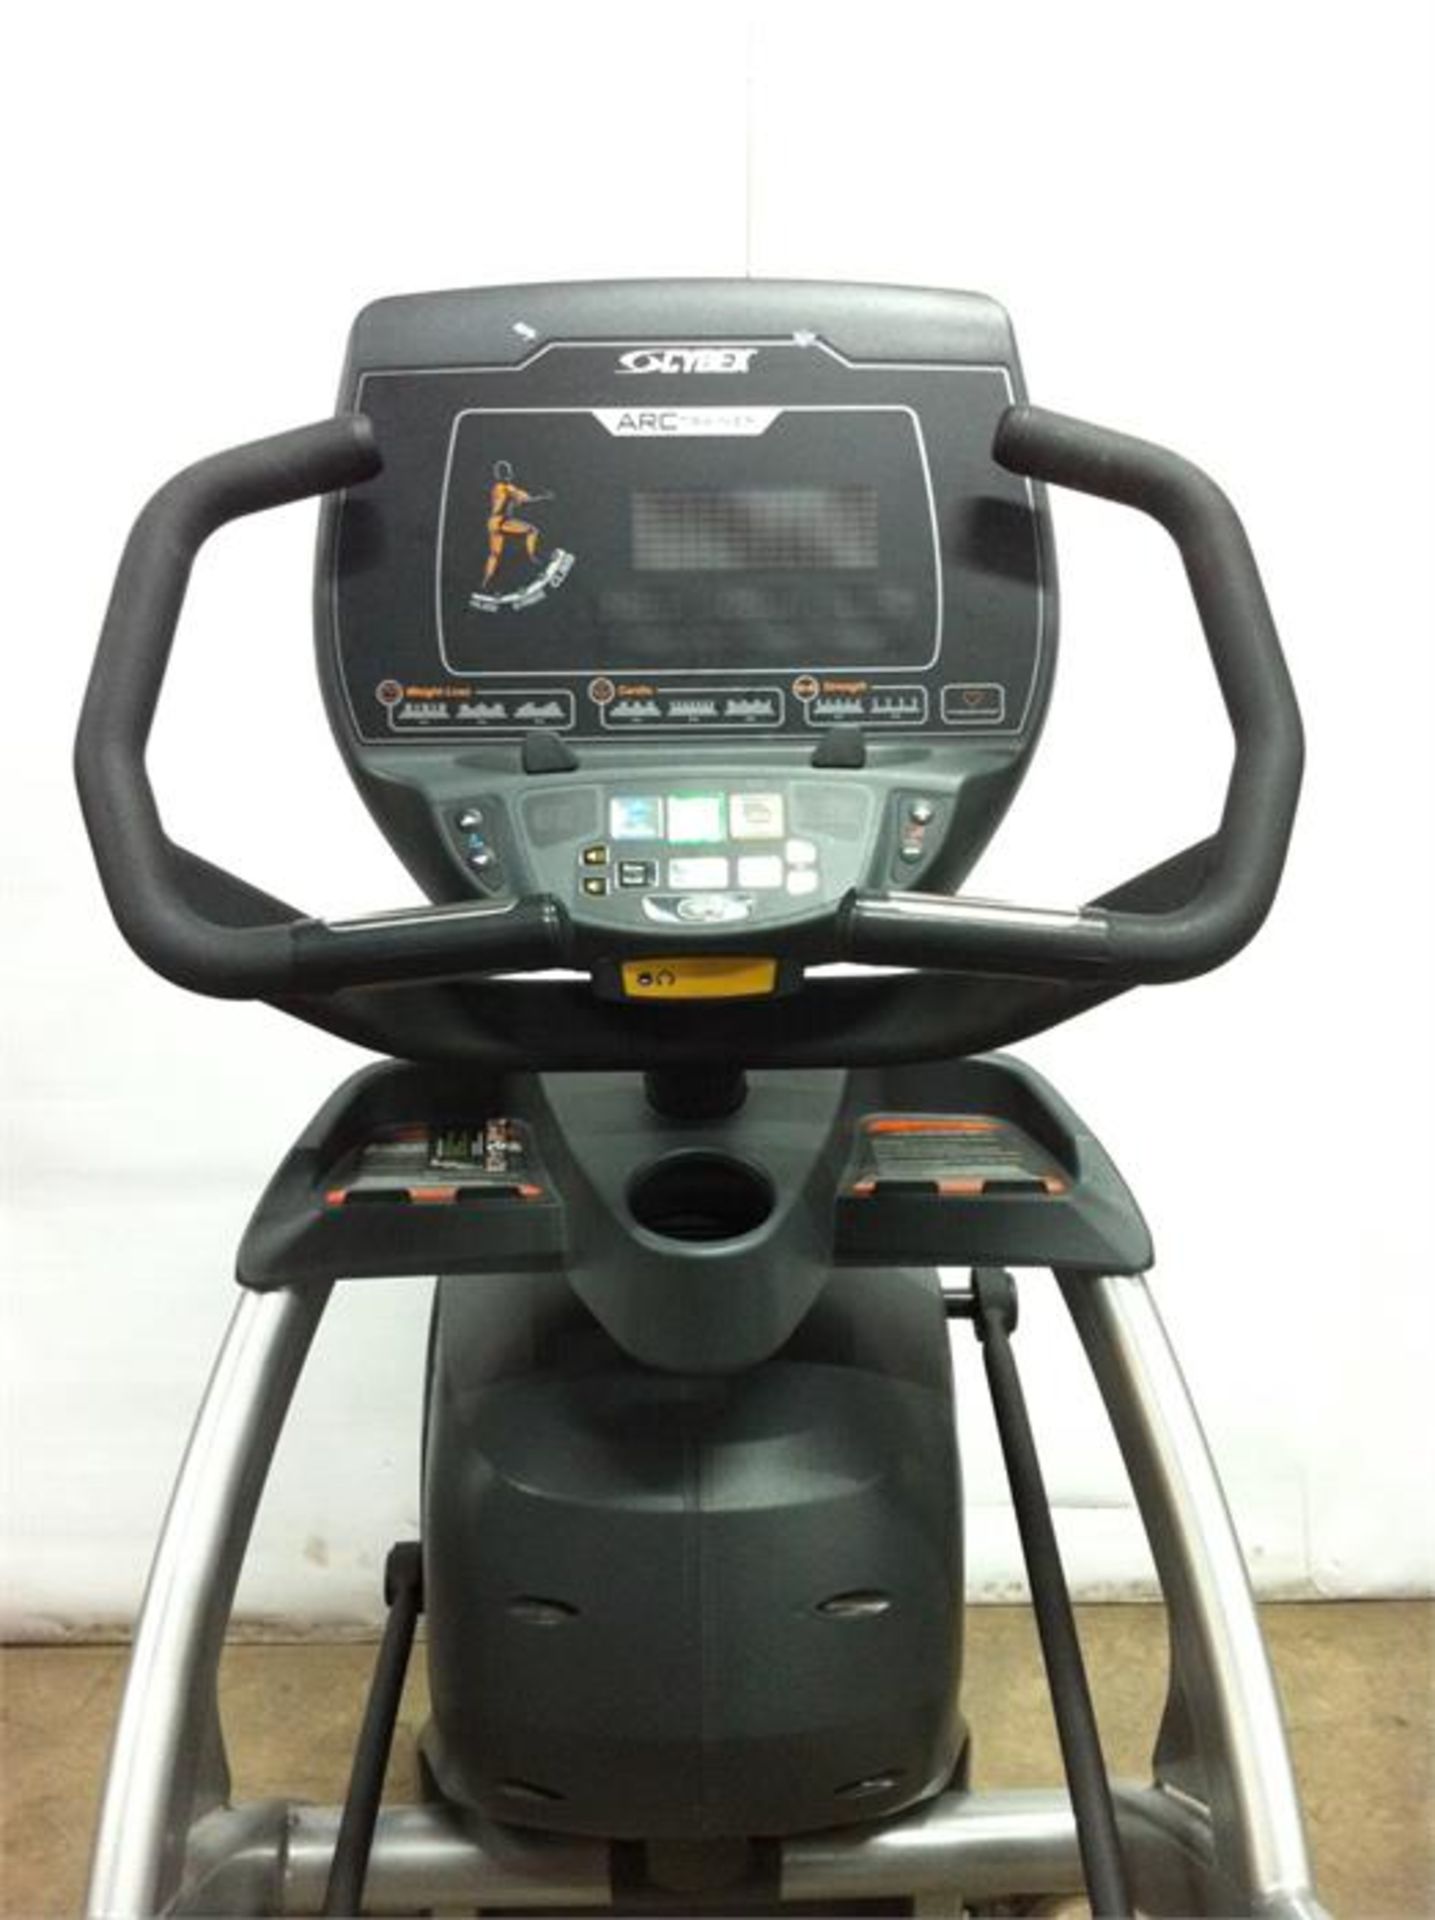 Cybex 625A Total Body Arc Trainer - Image 4 of 8